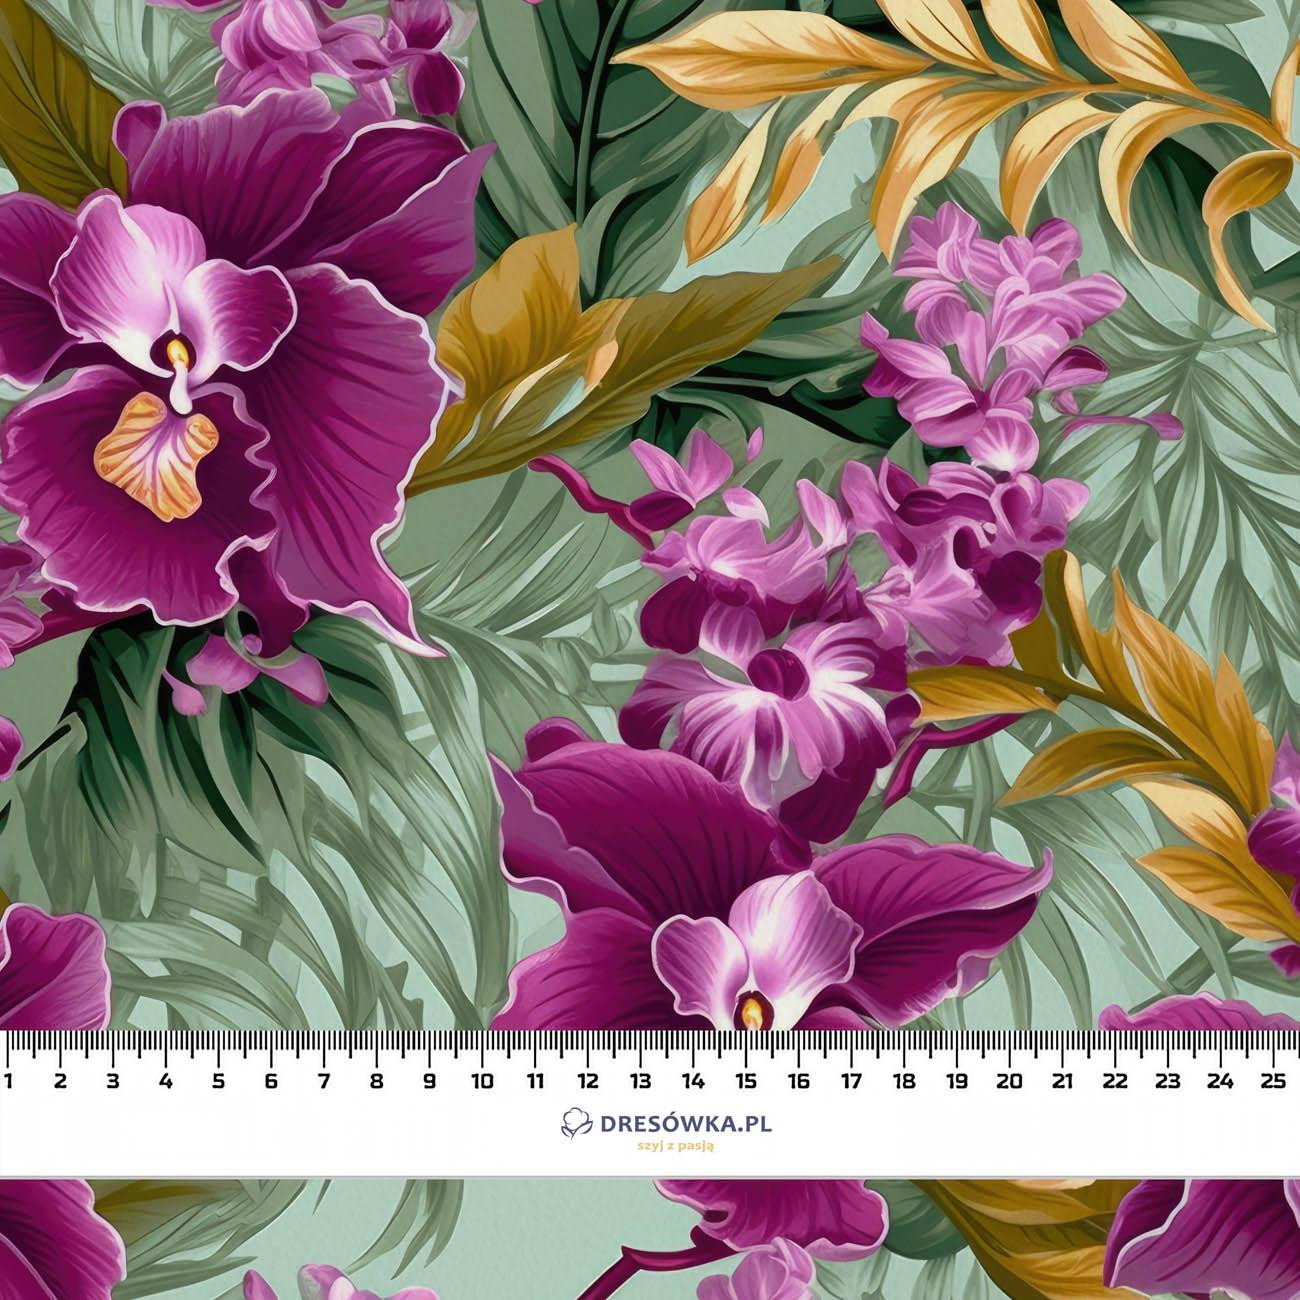 EXOTIC ORCHIDS MS. 3 - Satin